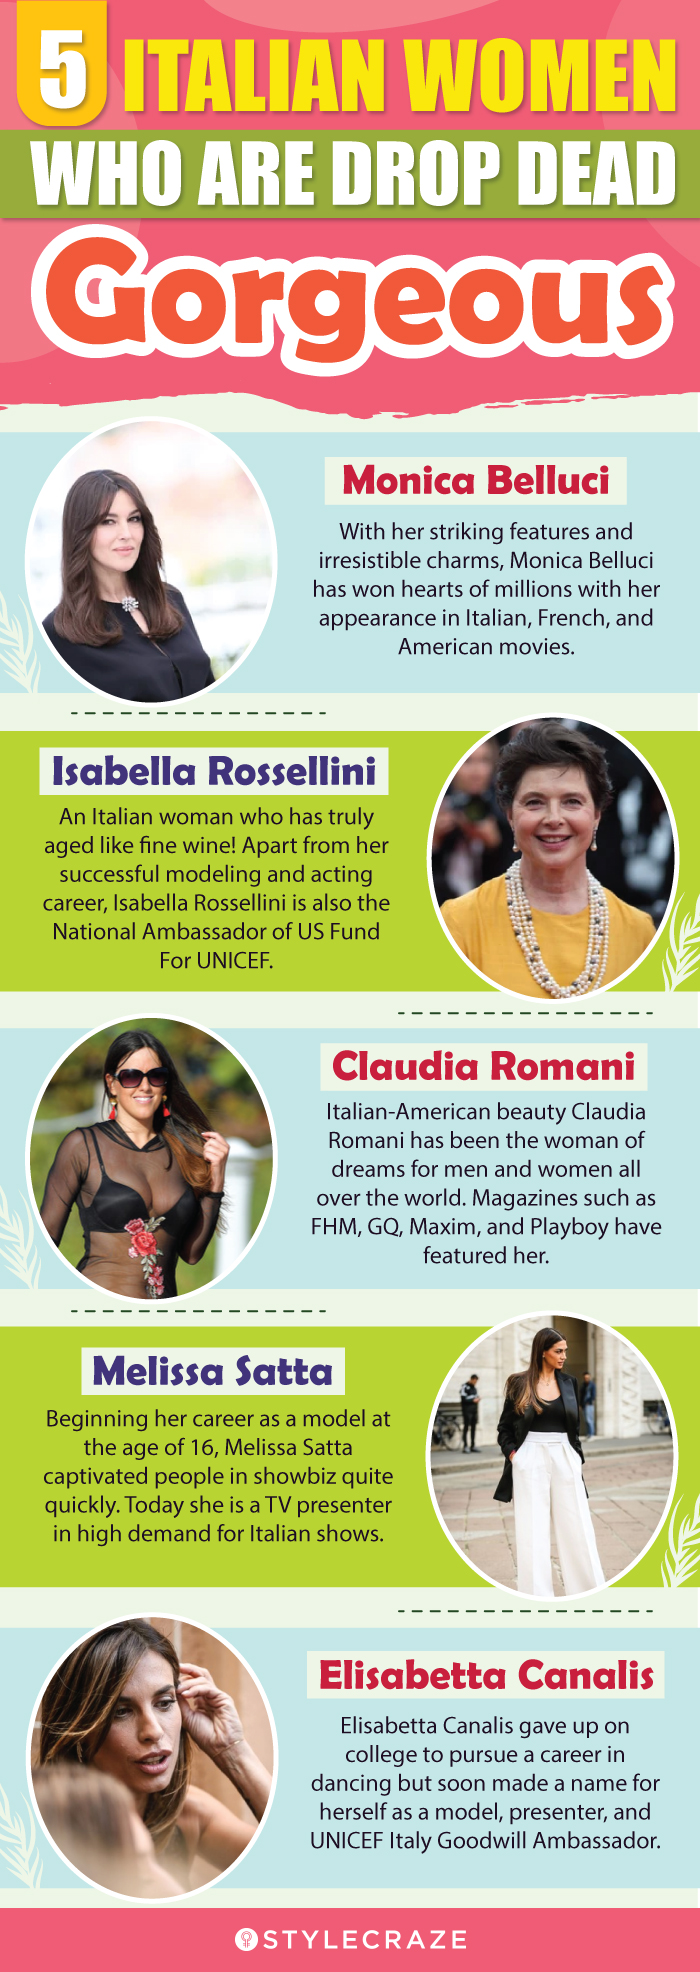 5 italian women who are drop dead gorgeous [infographic]